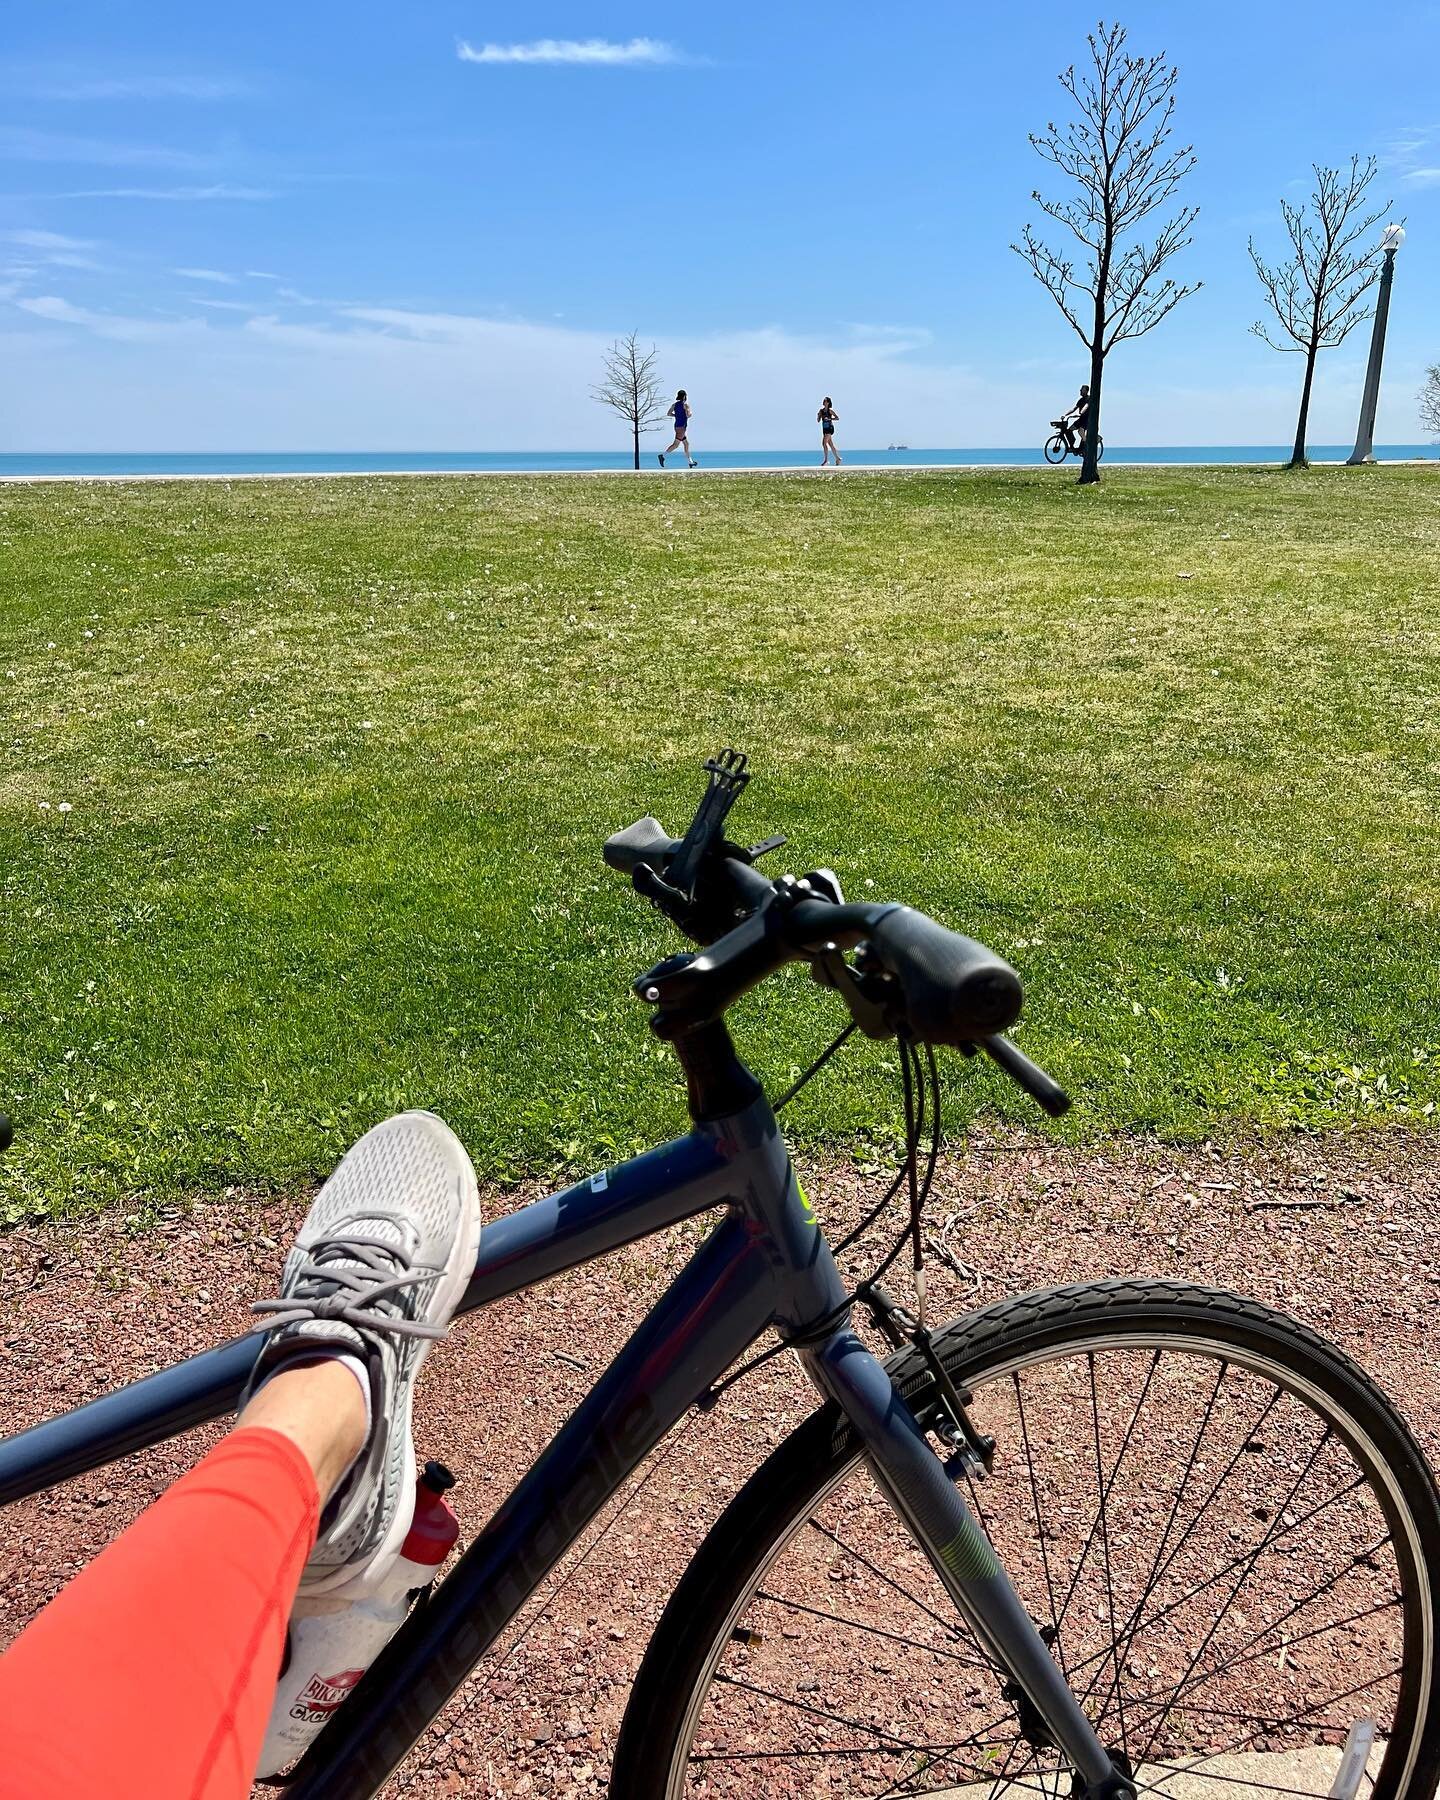 Unfortunately a client had to cancel&hellip;what to do&hellip;mmm&hellip;Suns out wheels out!!!🌞🚴&zwj;♀️
Different day, different wheels!
Consistently supporting you in your movement journeys&hellip;just get up &amp; move!!💪
Go to www.Flexwellness